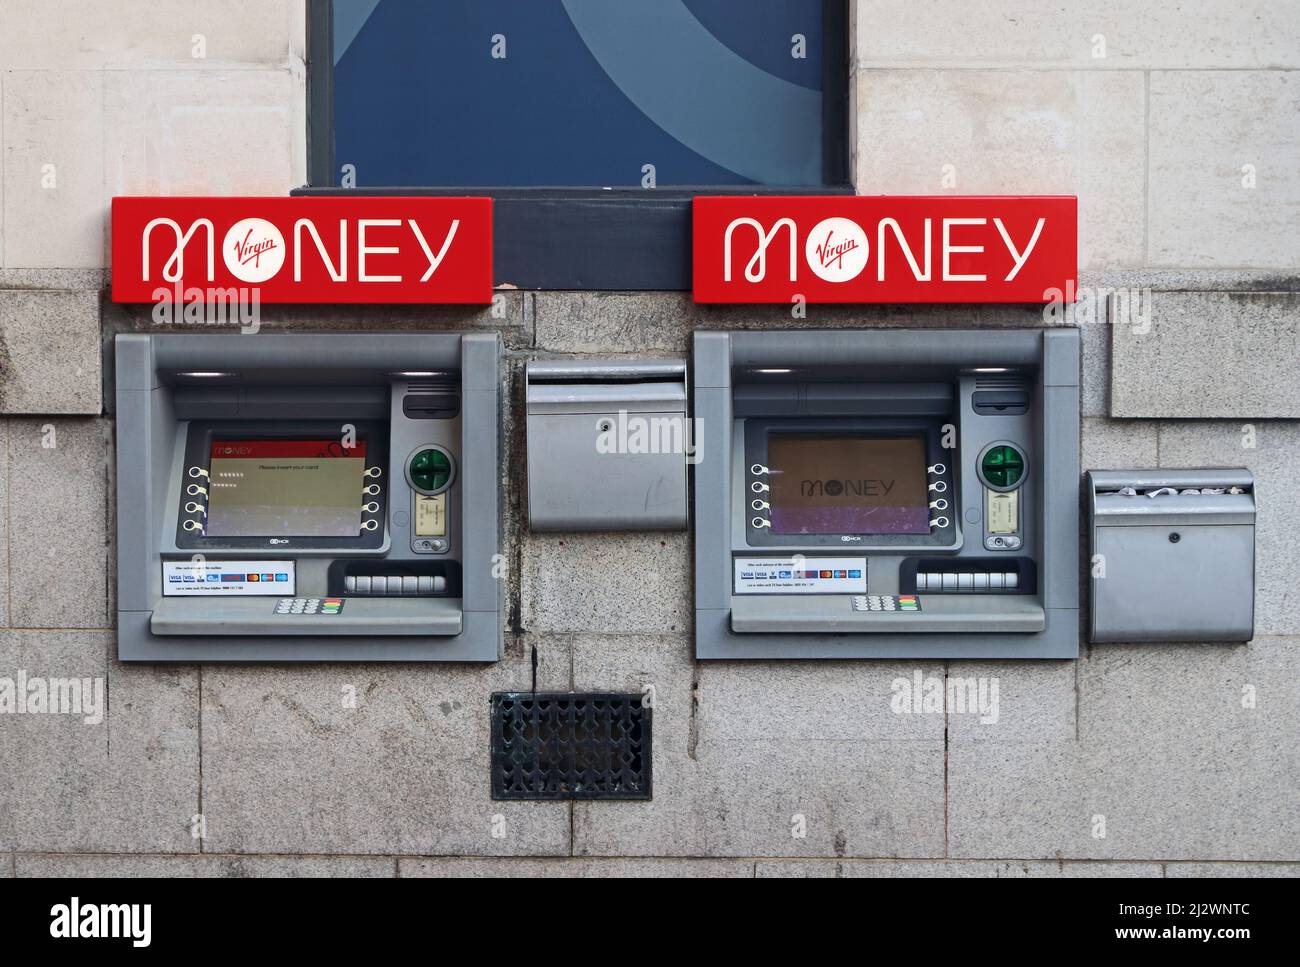 ATM machines outside branch of Virgin Money bank Stock Photo